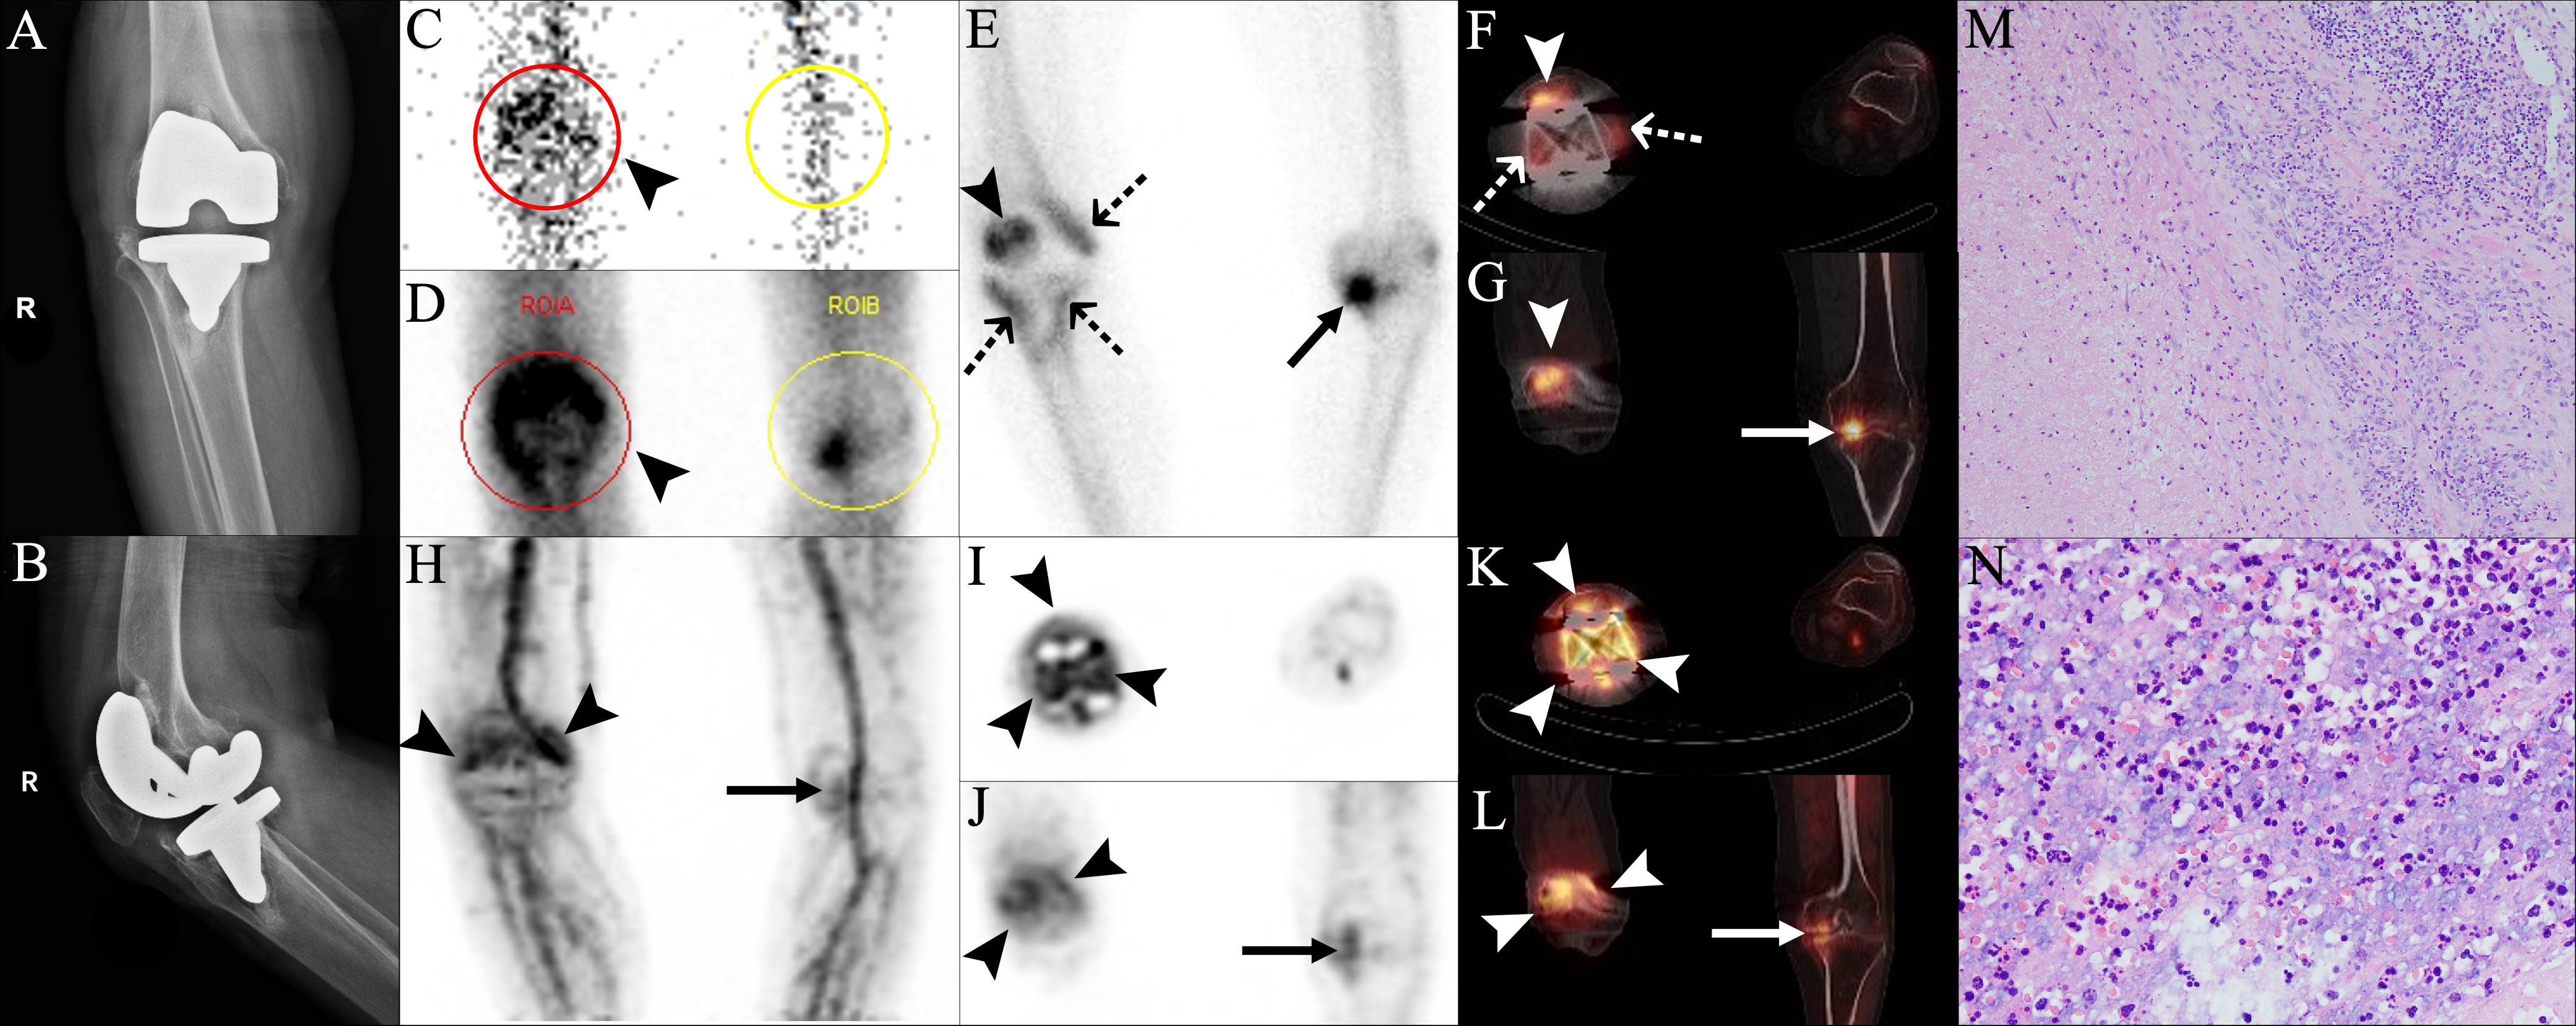 Fig. 3 
          True positive findings in three-phase bone scan and positron emission tomography (PET)/CT, and false negative findings for infection in single-photon emission CT (SPECT)/CT, in a patient with periprosthetic joint infection (PJI) caused by Staphylococcus epidermidis. A 66-year-old man underwent right knee arthroplasty for osteoarthritis (OA) in December 2019, and he developed pain and exudate in the right knee in March 2020. Further, physical examination showed swelling of the right knee joint, with a sinus tract that communicated with the prosthesis. a) and b) Anteroposterior (AP) and lateral radiographs of the right knee joint at three months postoperatively showed obvious swelling of the right knee joint and an uneven decrease in bone density around the prosthesis. The patient was diagnosed with PJI, considering the above symptoms. The patient was included in our prospective study, and he signed an informed consent form for further imaging. c) to e) 99mTc-MDP three-phase bone scan showed positive perfusion, blood pool, and delayed phase in the right knee (arrowheads) (red circle and region of interest of the affected side (ROIA); yellow circle and region of interest of the normal side (ROIB)). f) and g) SPECT/CT revealed focal increased bone metabolism at the right patella-prosthesis interface (arrowheads), and e) and f) the uniform and symmetrical uptake distributed along the edge of tibial and femoral component was regarded as non-specific uptake (dotted arrows). In addition, e) and g) show that focal uptake with hyperosteogeny was found on the medial articular surface of the left knee, which was considered to be OA (arrows). h) to l) 68Ga-citrate PET/CT showed an obvious diffuse uptake around the right knee prosthesis (arrowheads). h), j), and l) PET/CT also showed a focal uptake in the left knee joint, which was consistent with the findings of SPECT/CT (arrows). Subsequently, the patient underwent surgical treatment. m) and n) Histopathological examination showed the presence of acute suppurative inflammation (m, haematoxylin and eosin (H&E) 100×; n, H&E 400×). Staphylococcus epidermidis was found in three of the five samples.
        